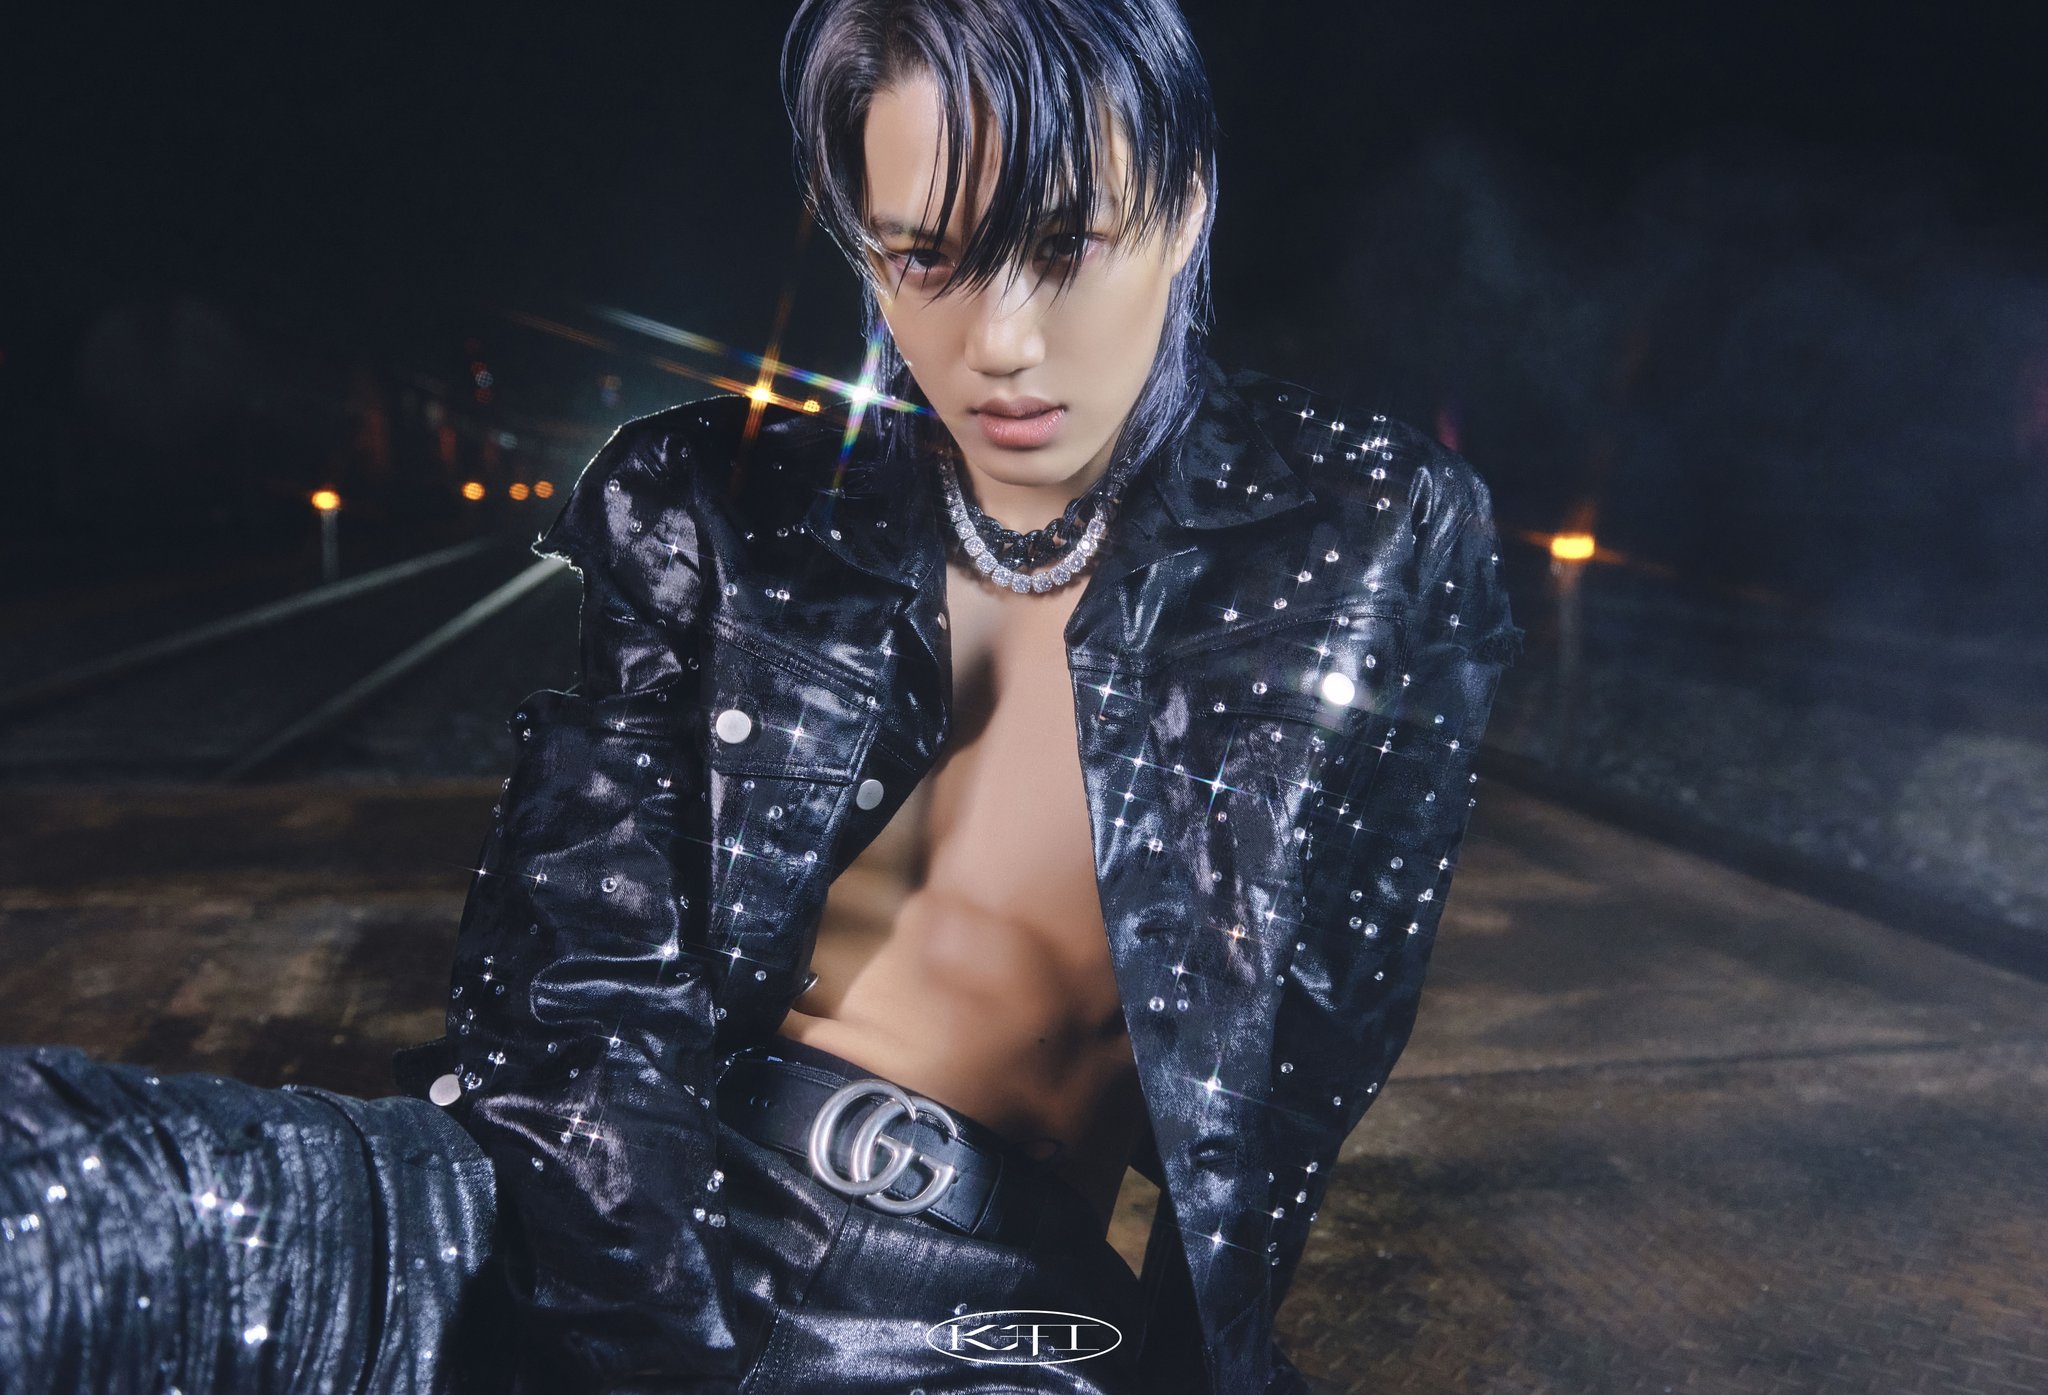 pannchoa on Twitter: &quot;Kai makes his solo debut with R&amp;B bop &#39;Mmmh&#39;, knets  react! https://t.co/YcWDcbfUu4… &quot;